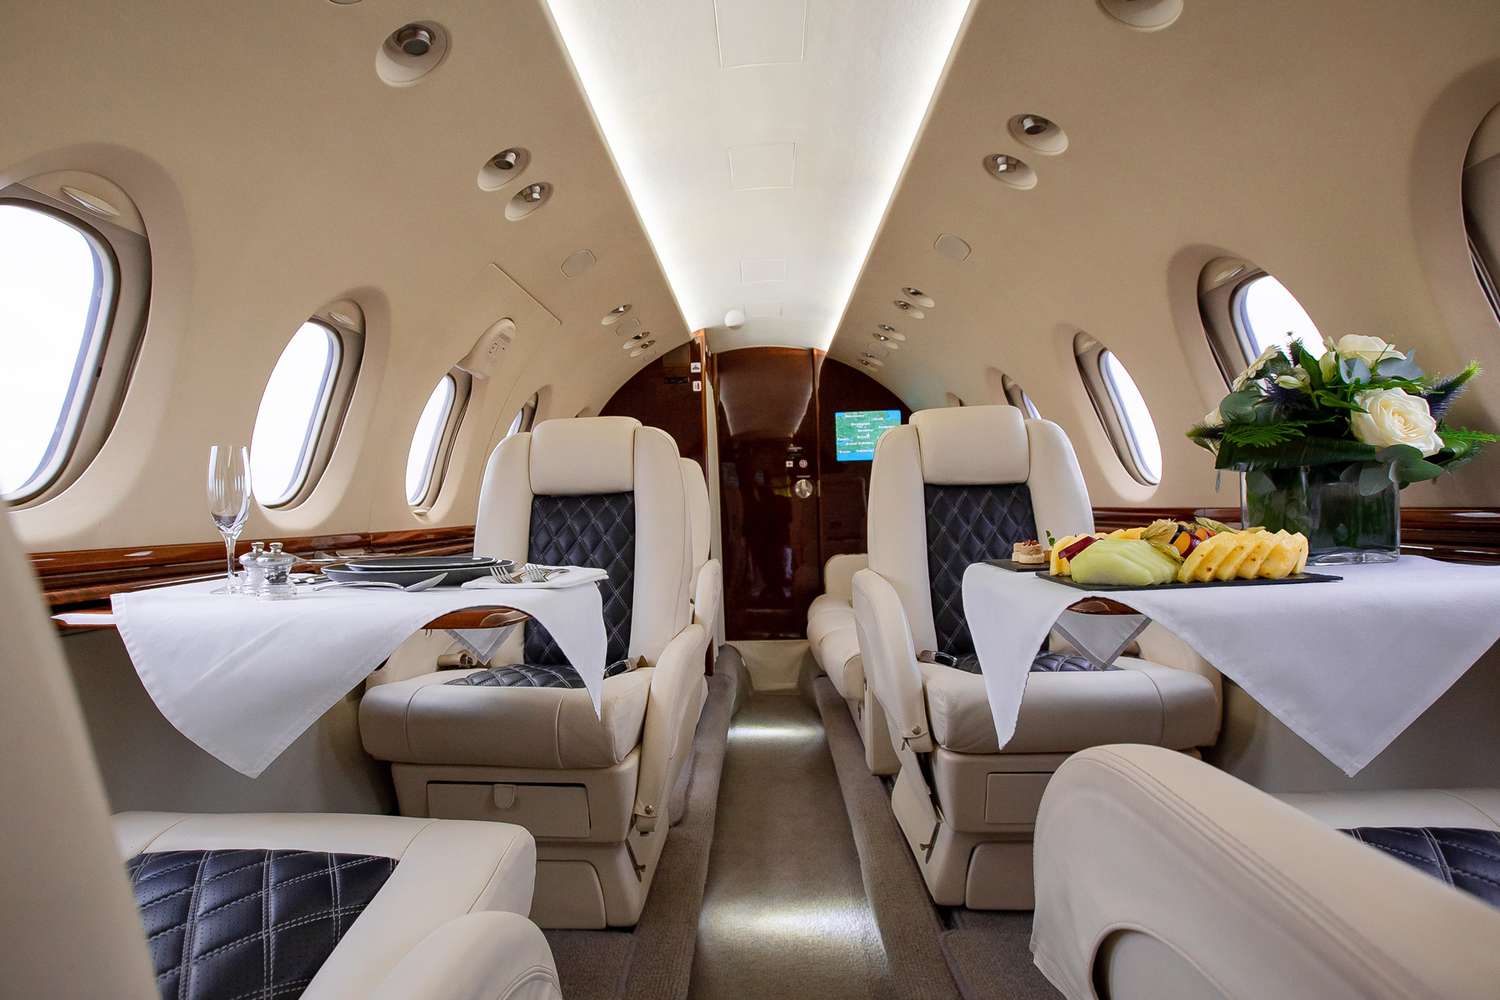 Picture-Perfect I Do’s: Charter A Private Jet For Your Wedding